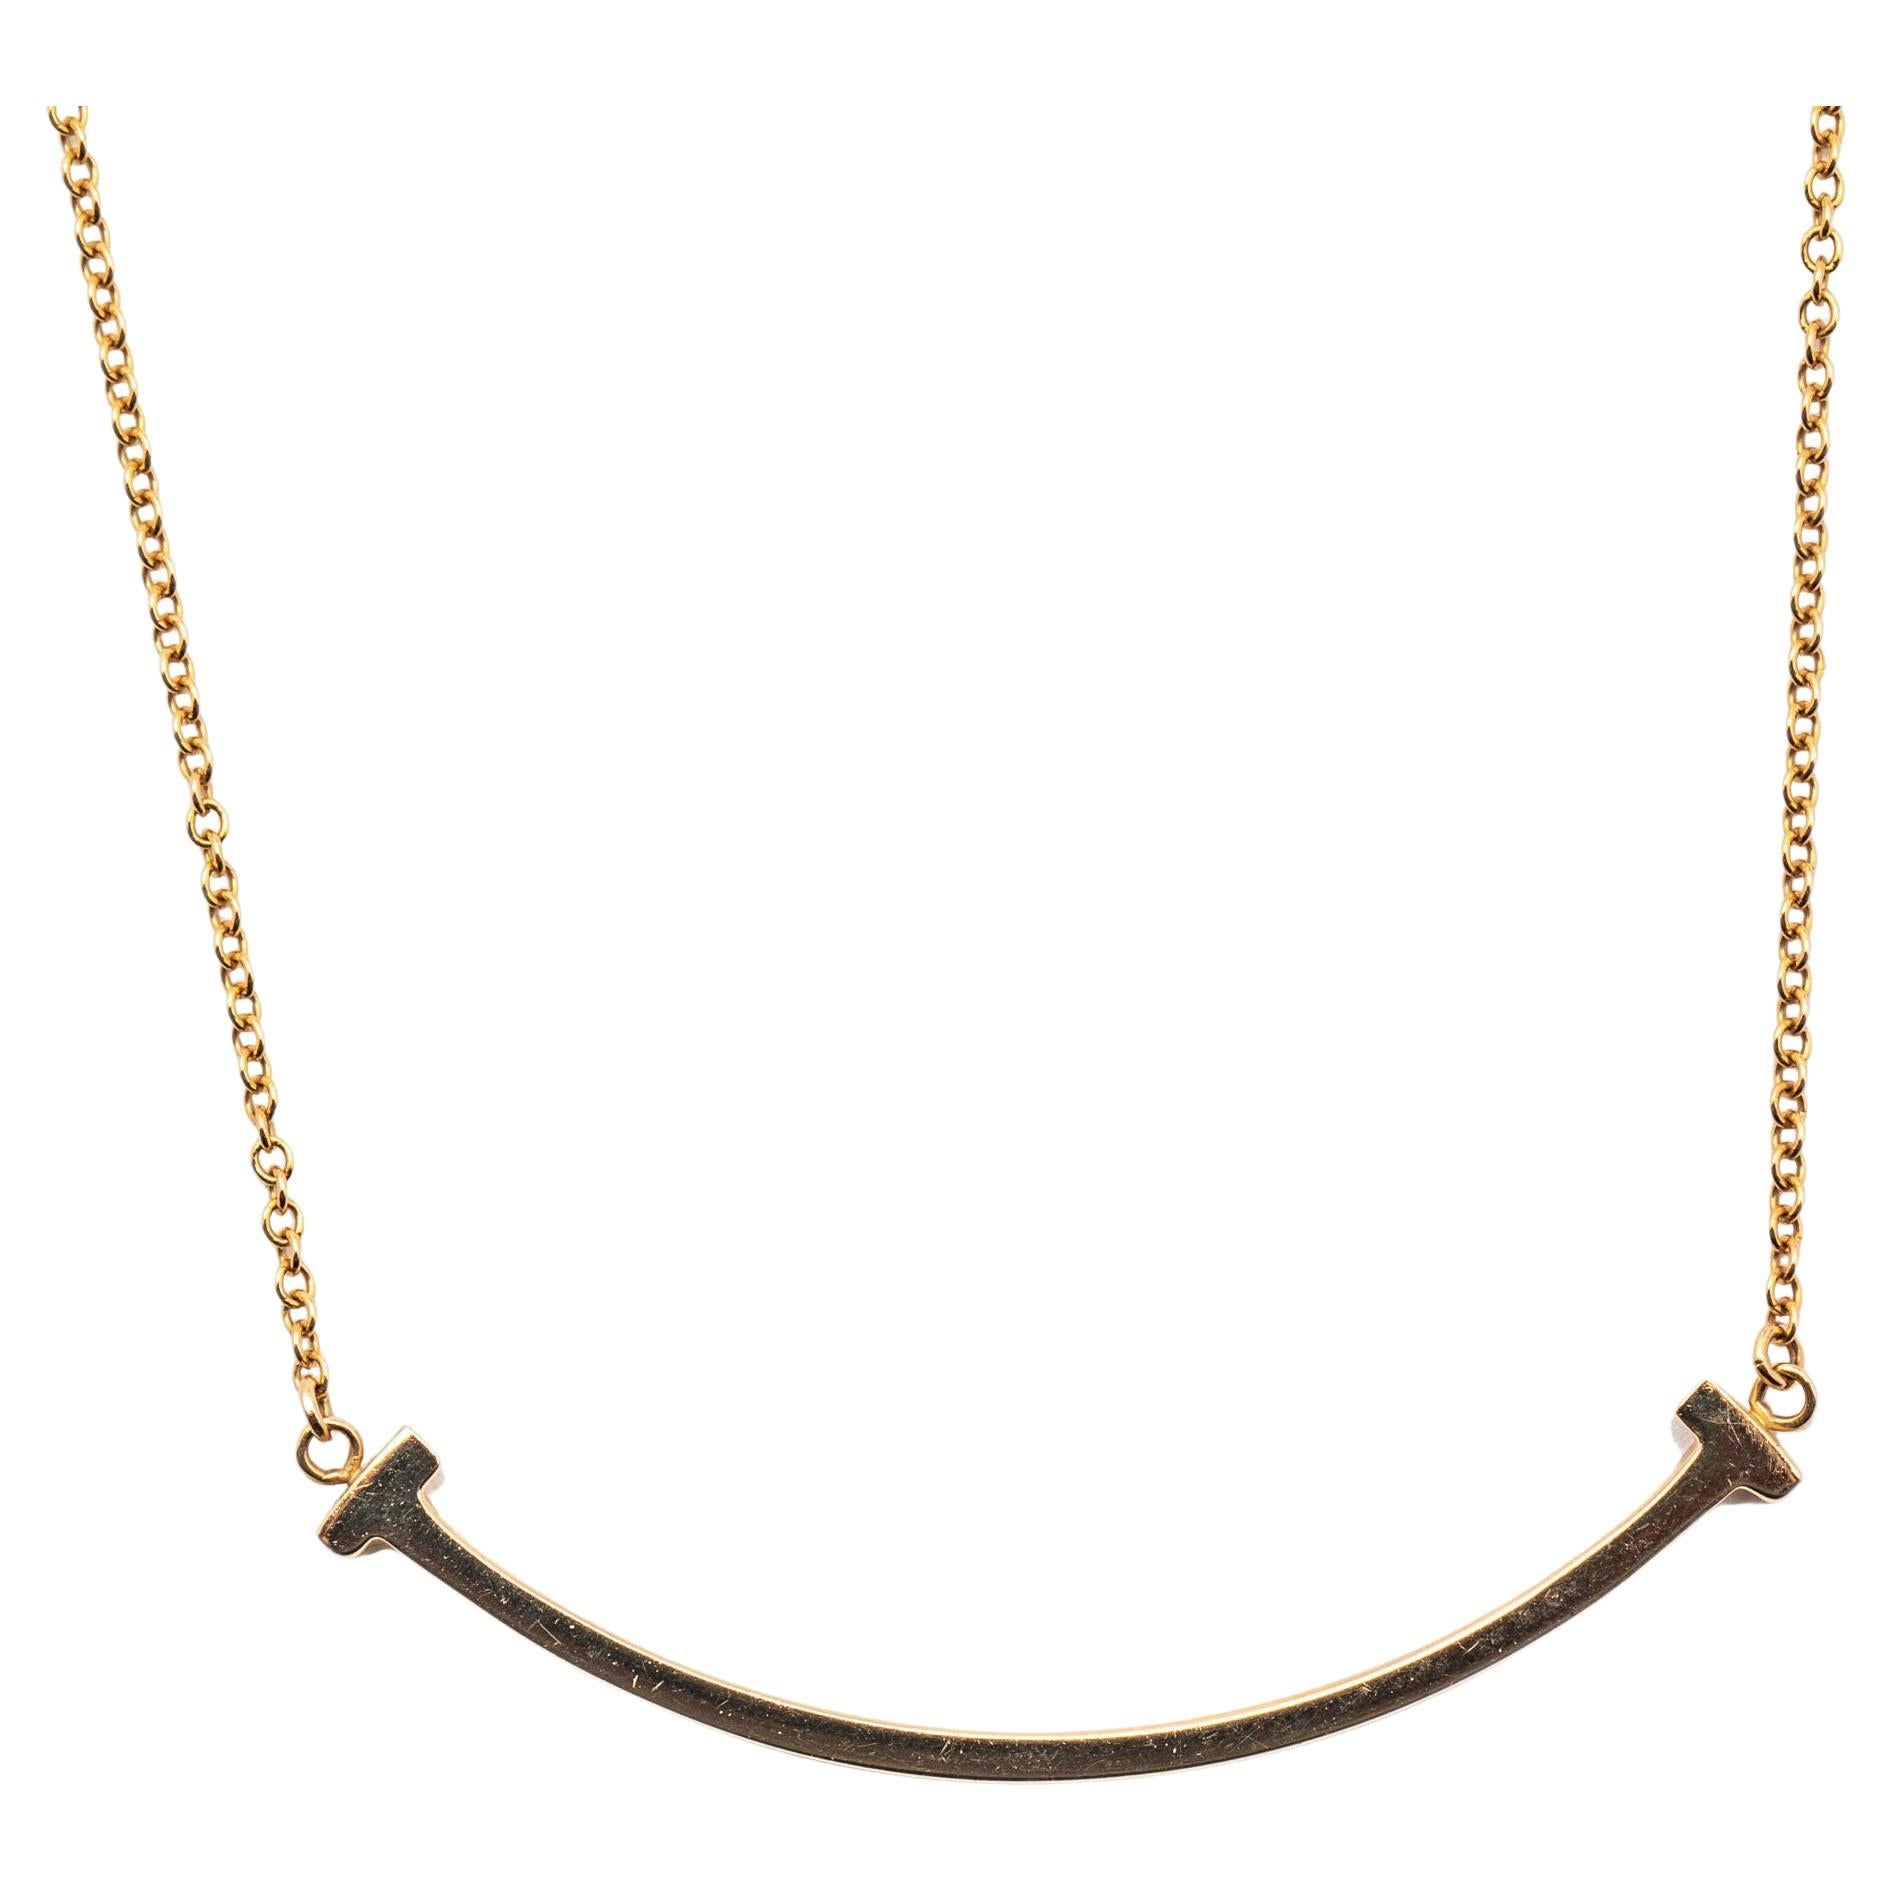 Modern and minimalistic, the beautiful pendant necklace features Tiffany & Co.'s signature Tiffany T letter symbol that resembles strength and resilience. Crafted from 18k rose gold metal, the pendant is shaped like a smile with the letter T on the